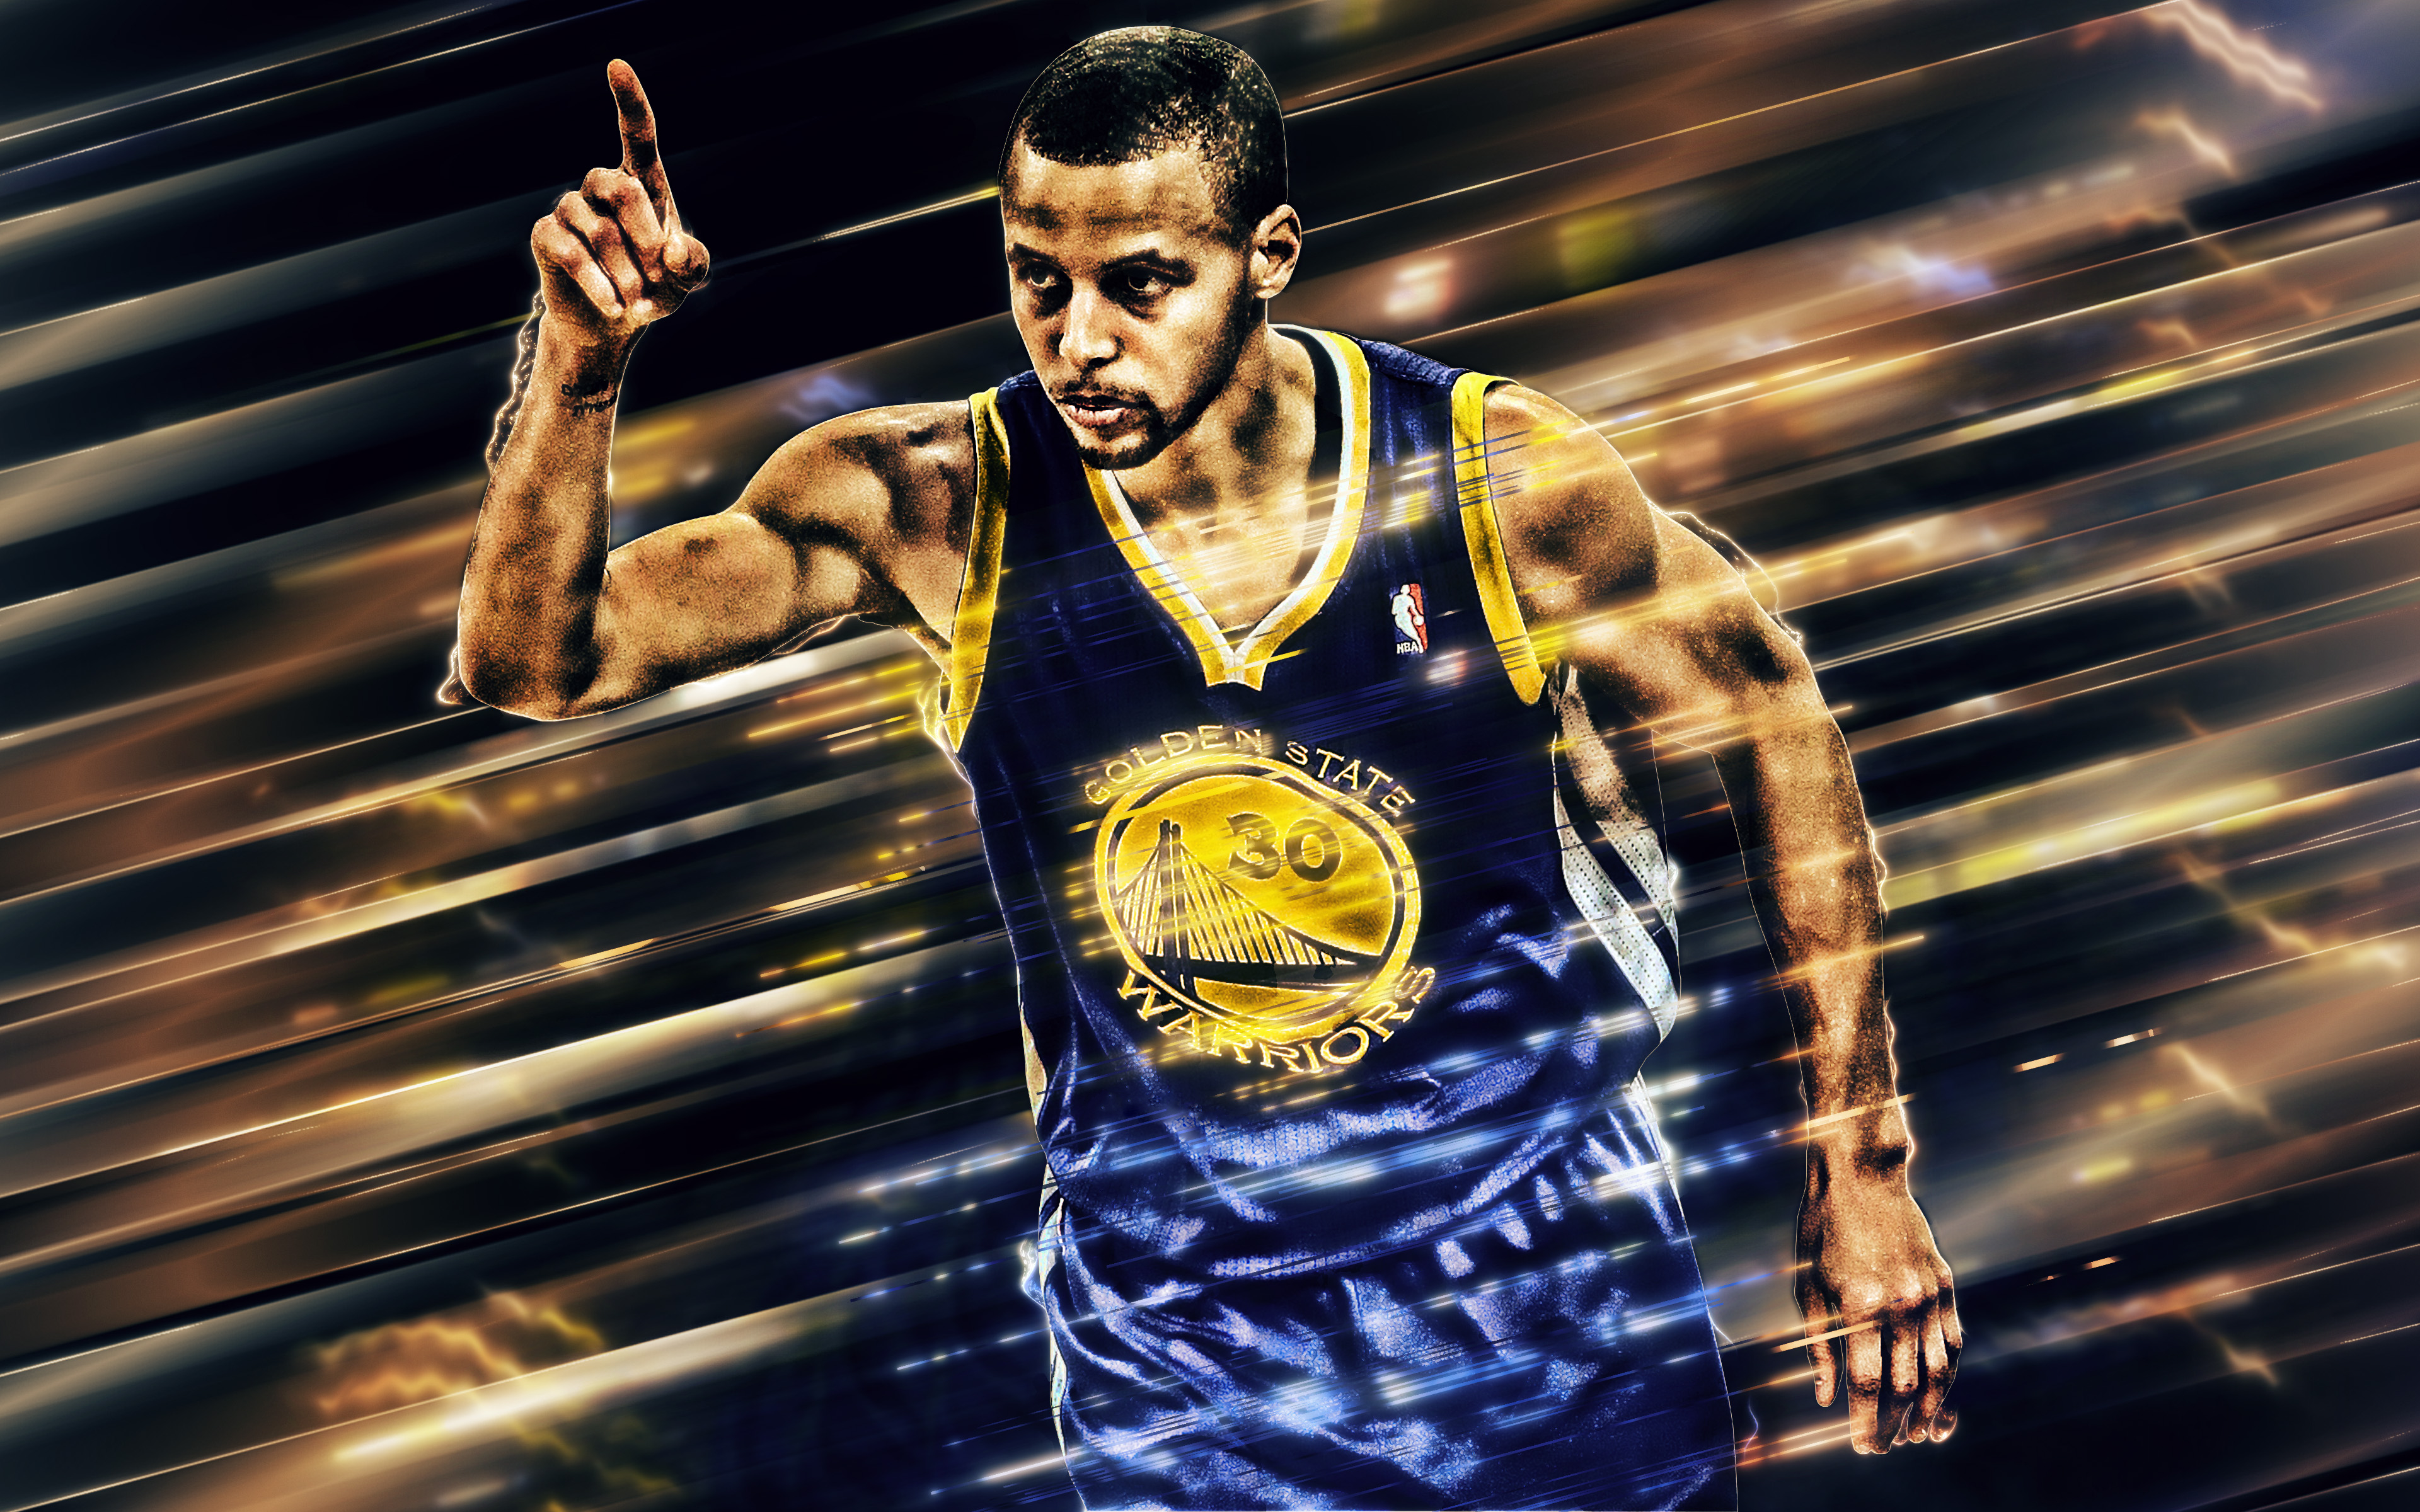 HD stephen curry wallpapers